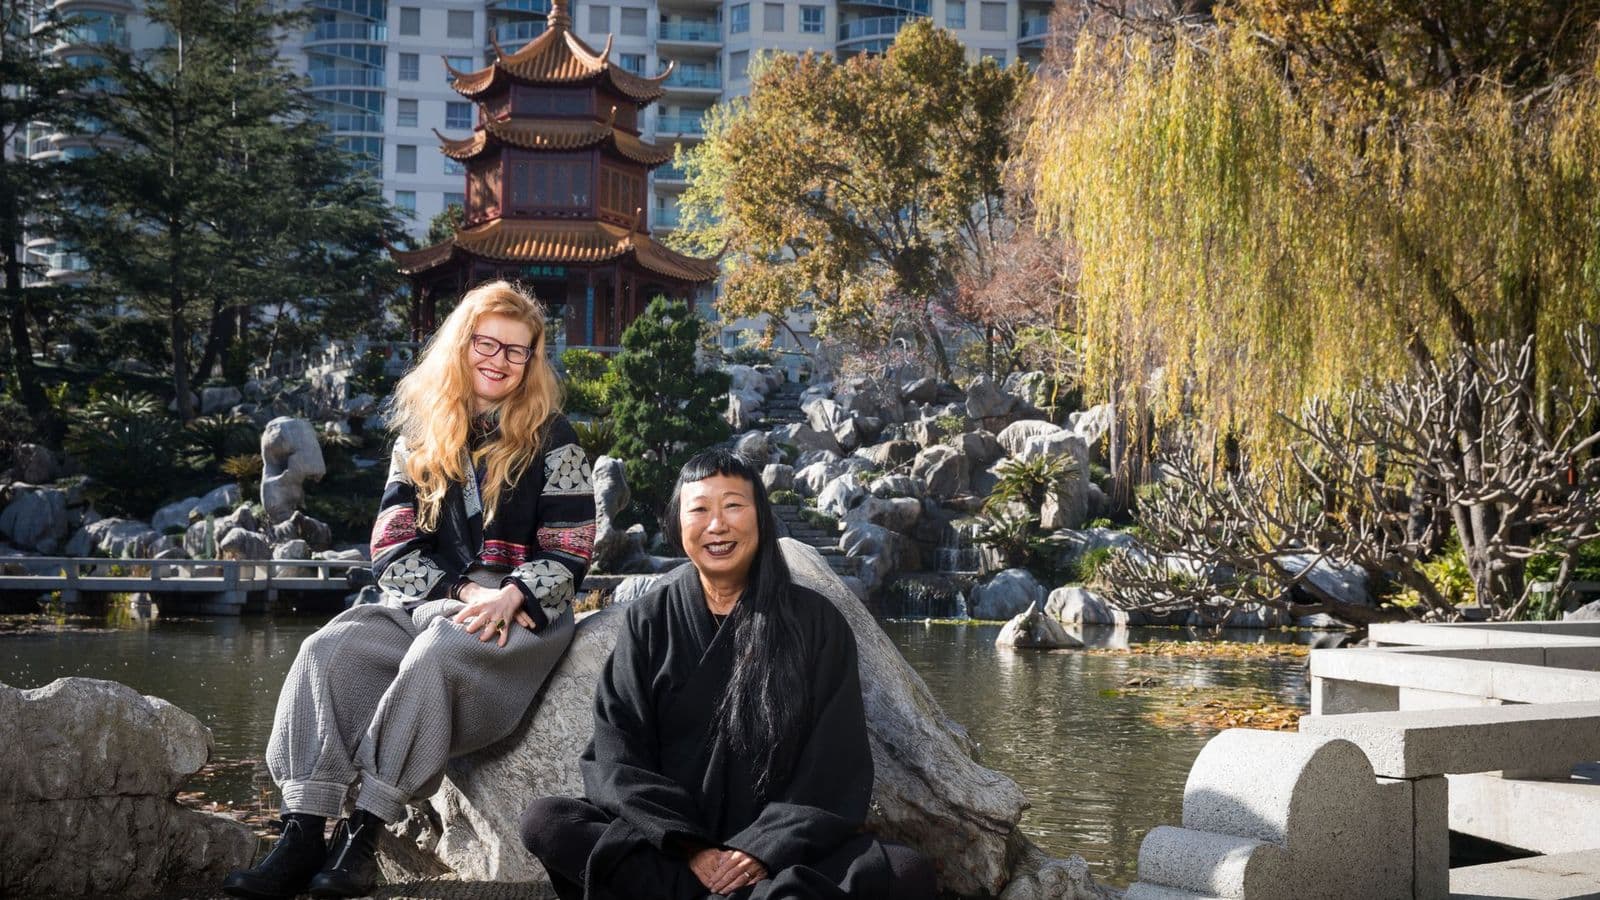 Photo of two women sitting on a rock in a Chinese garden setting